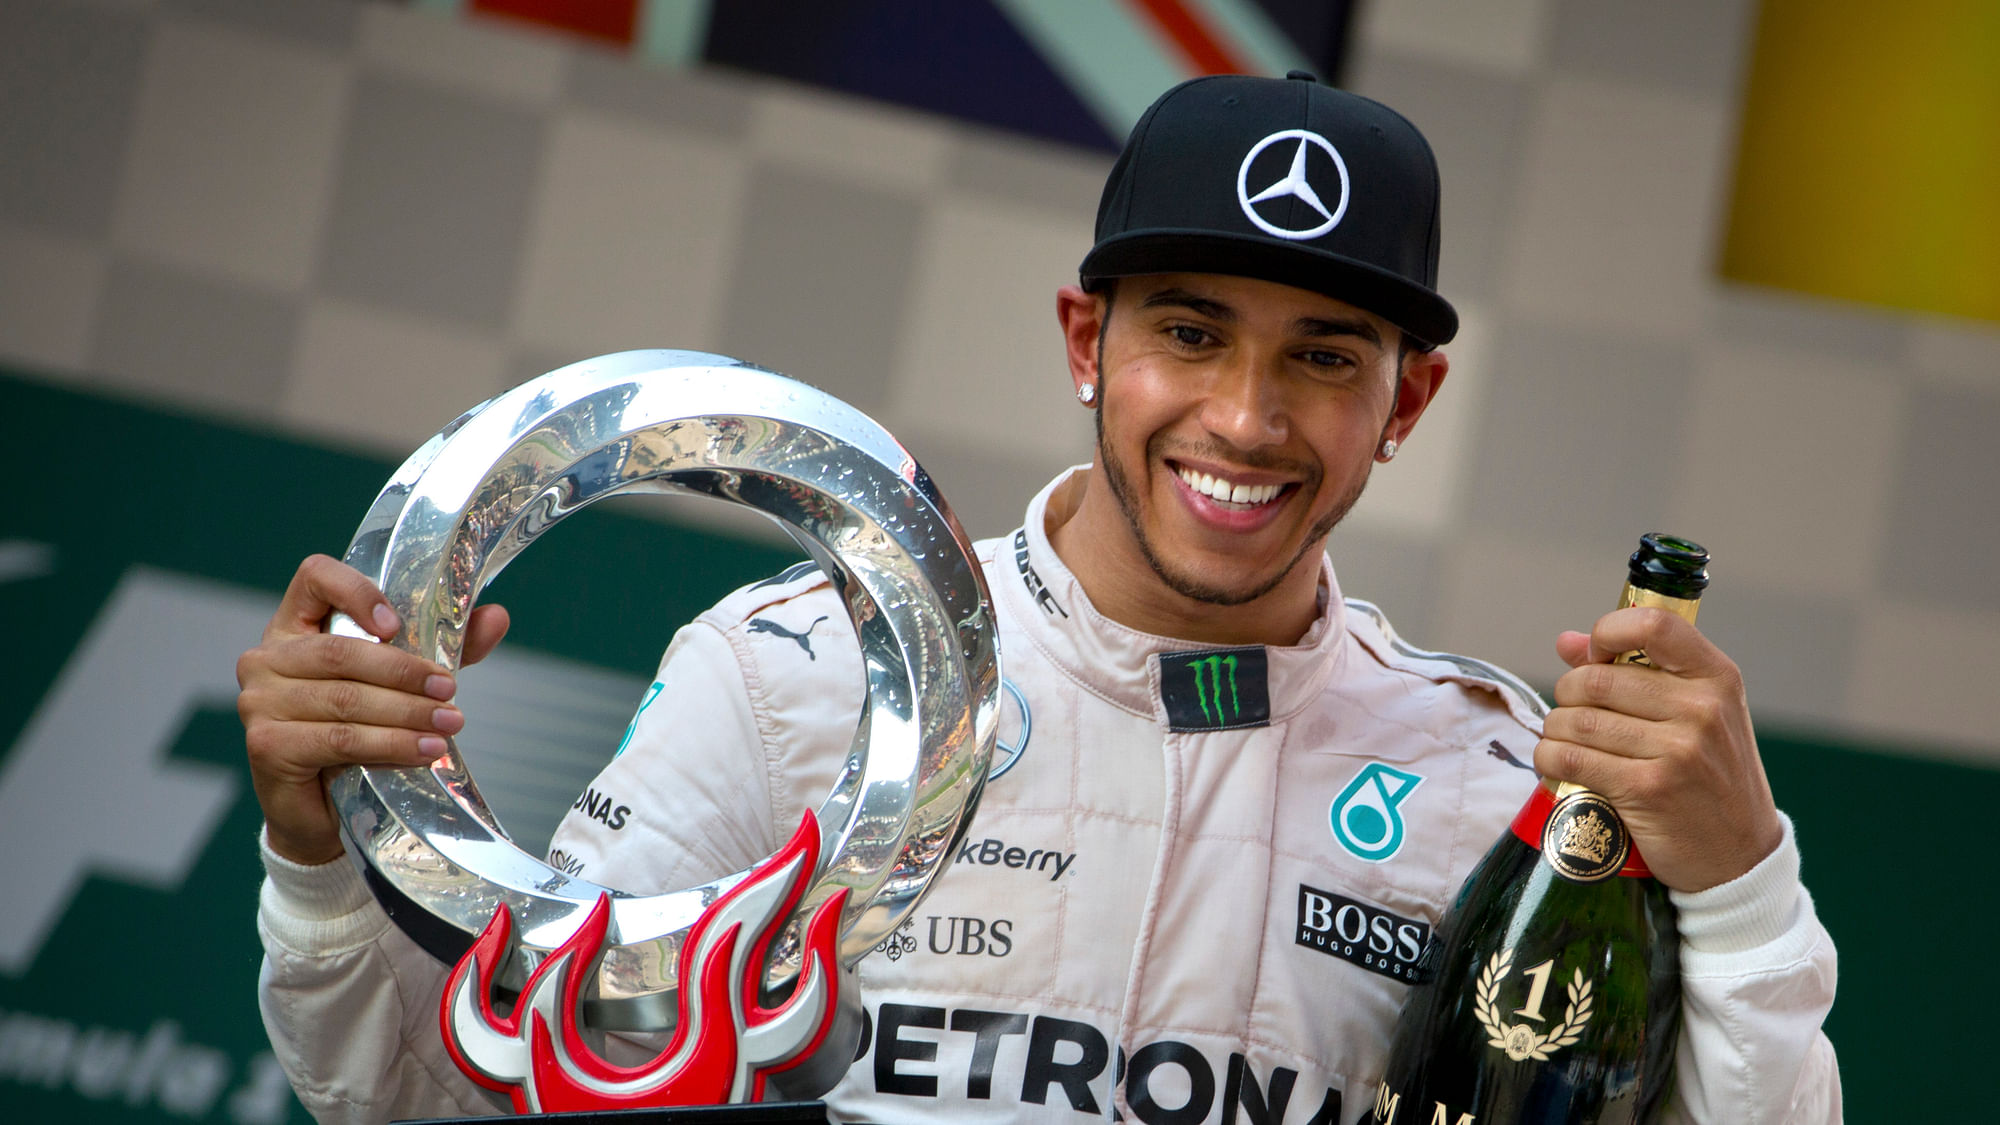 Formula 1 Champions Lewis Hamilton has clarified his stand after calling India a ‘poor’ country in an earlier interview.